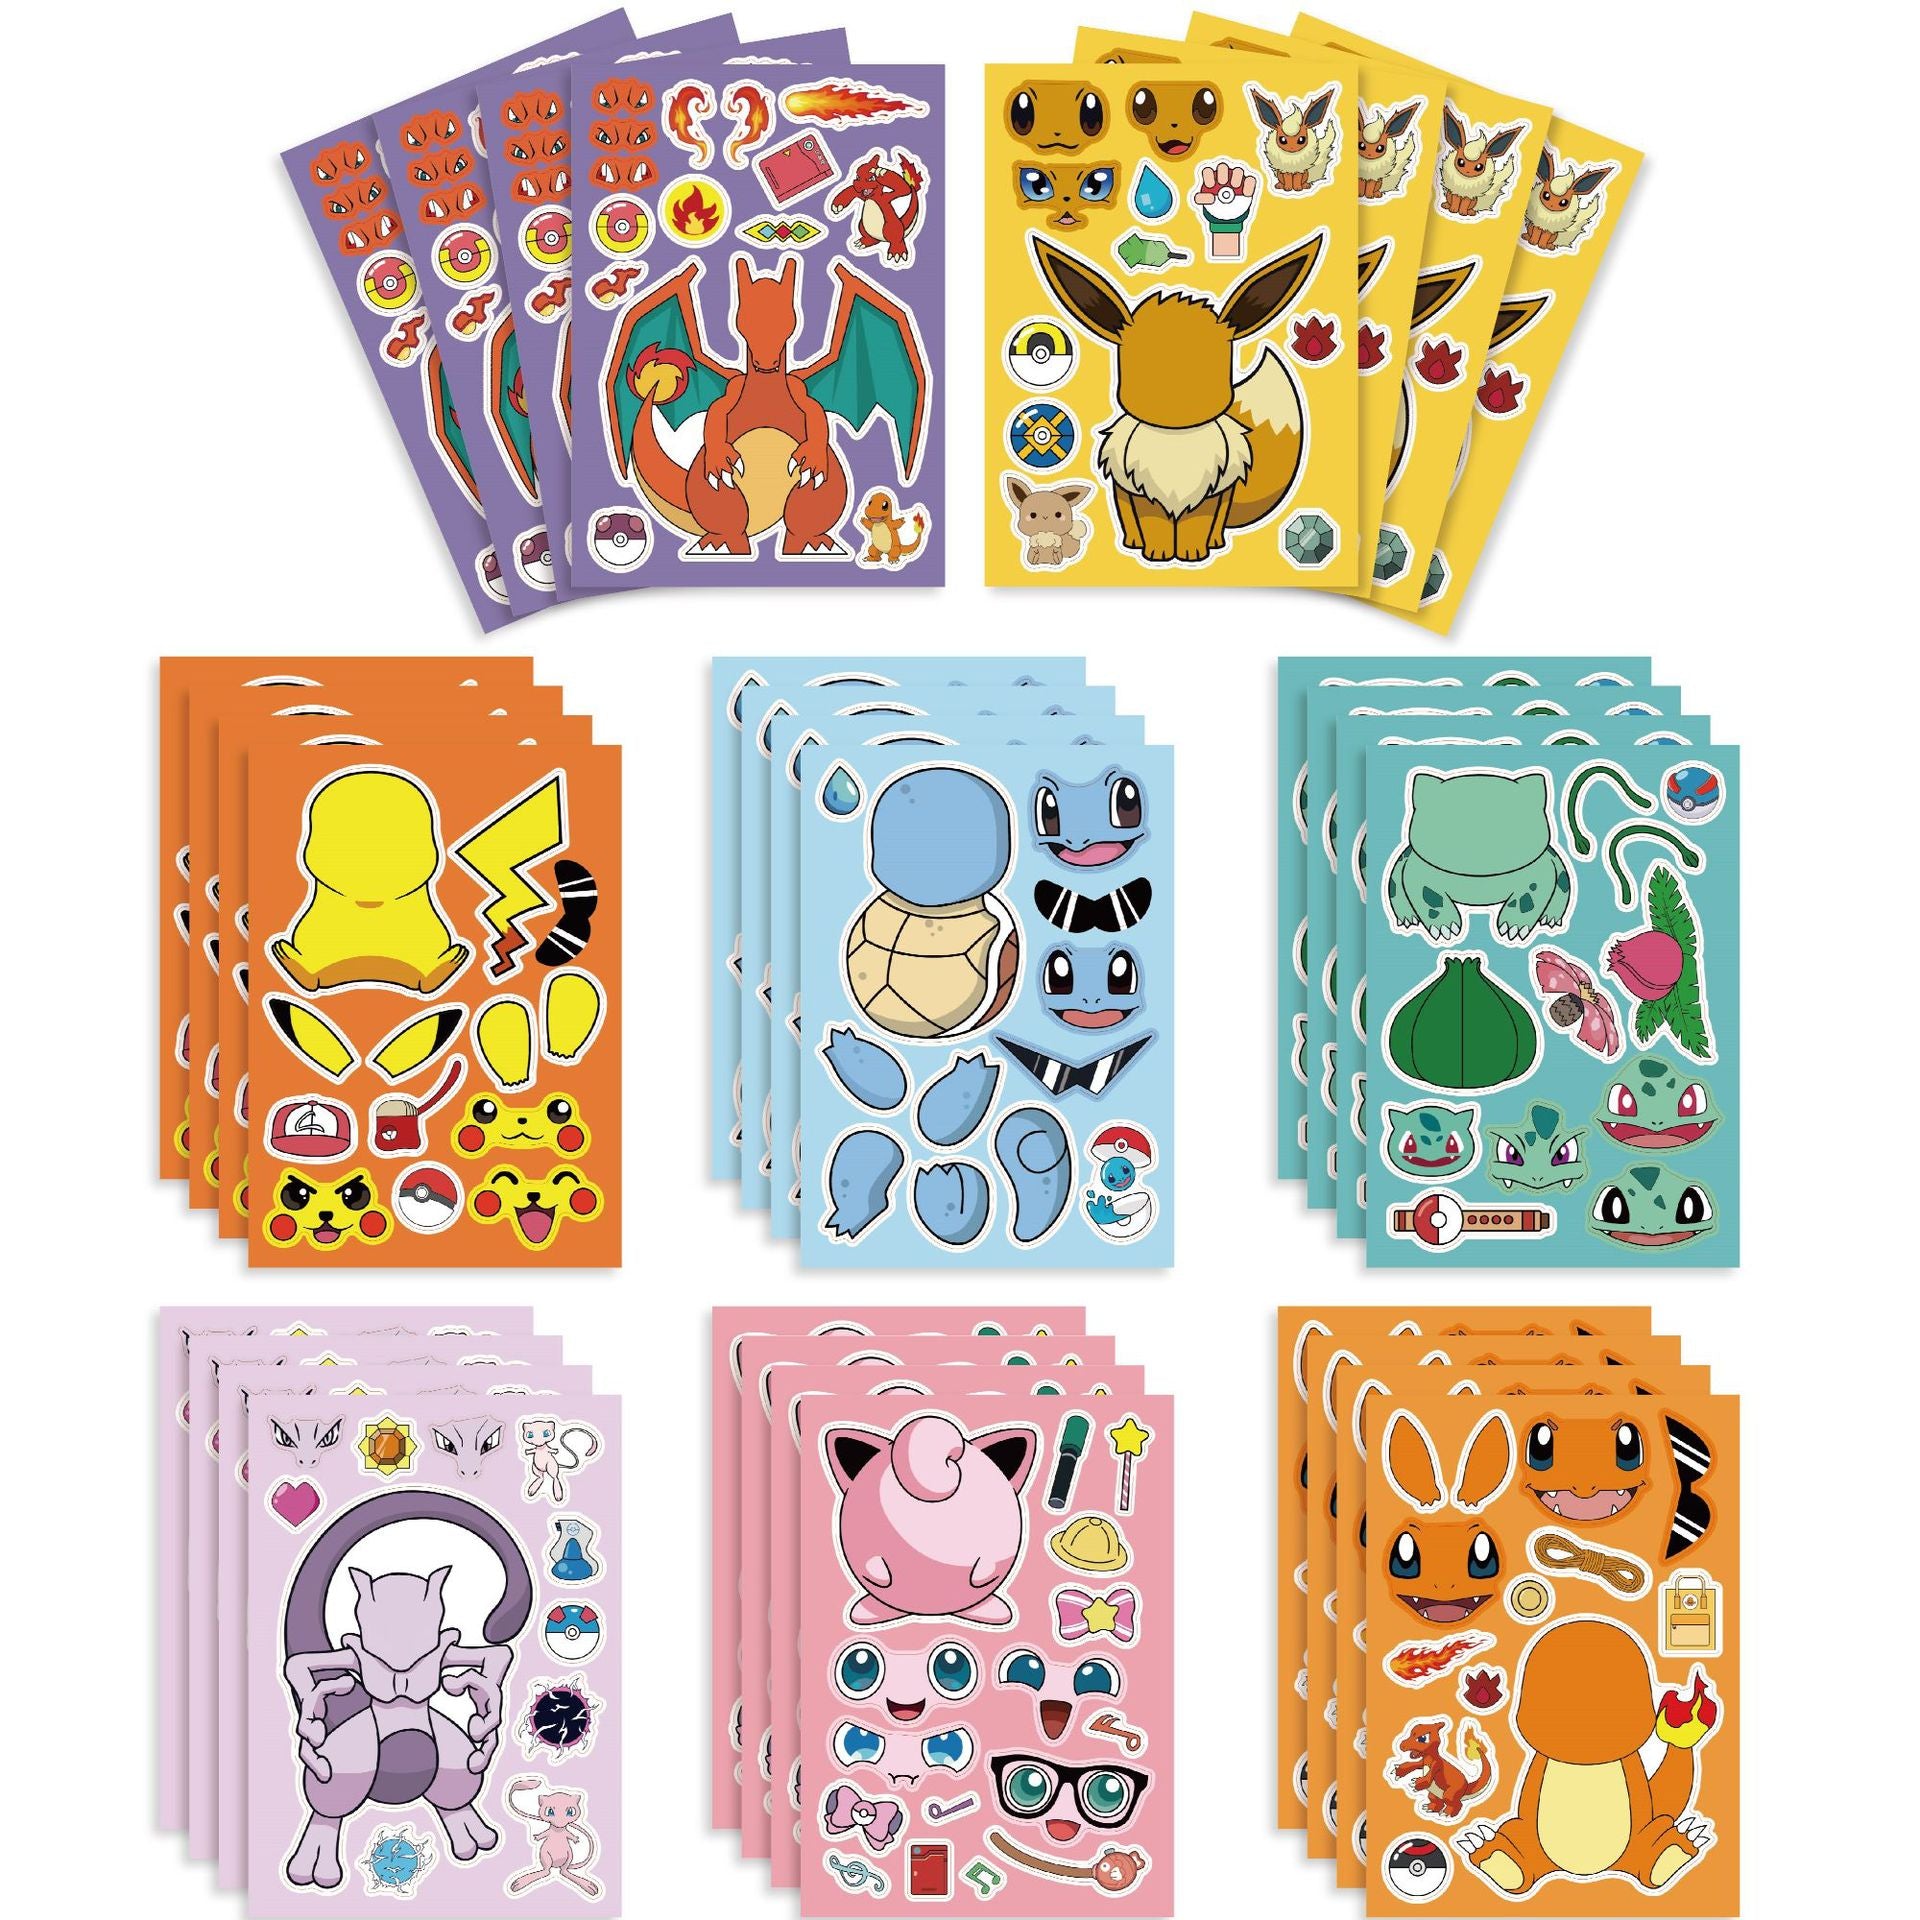 32 Sheets Cartoon Pokemon Make a Face DIY Stickers for Kids